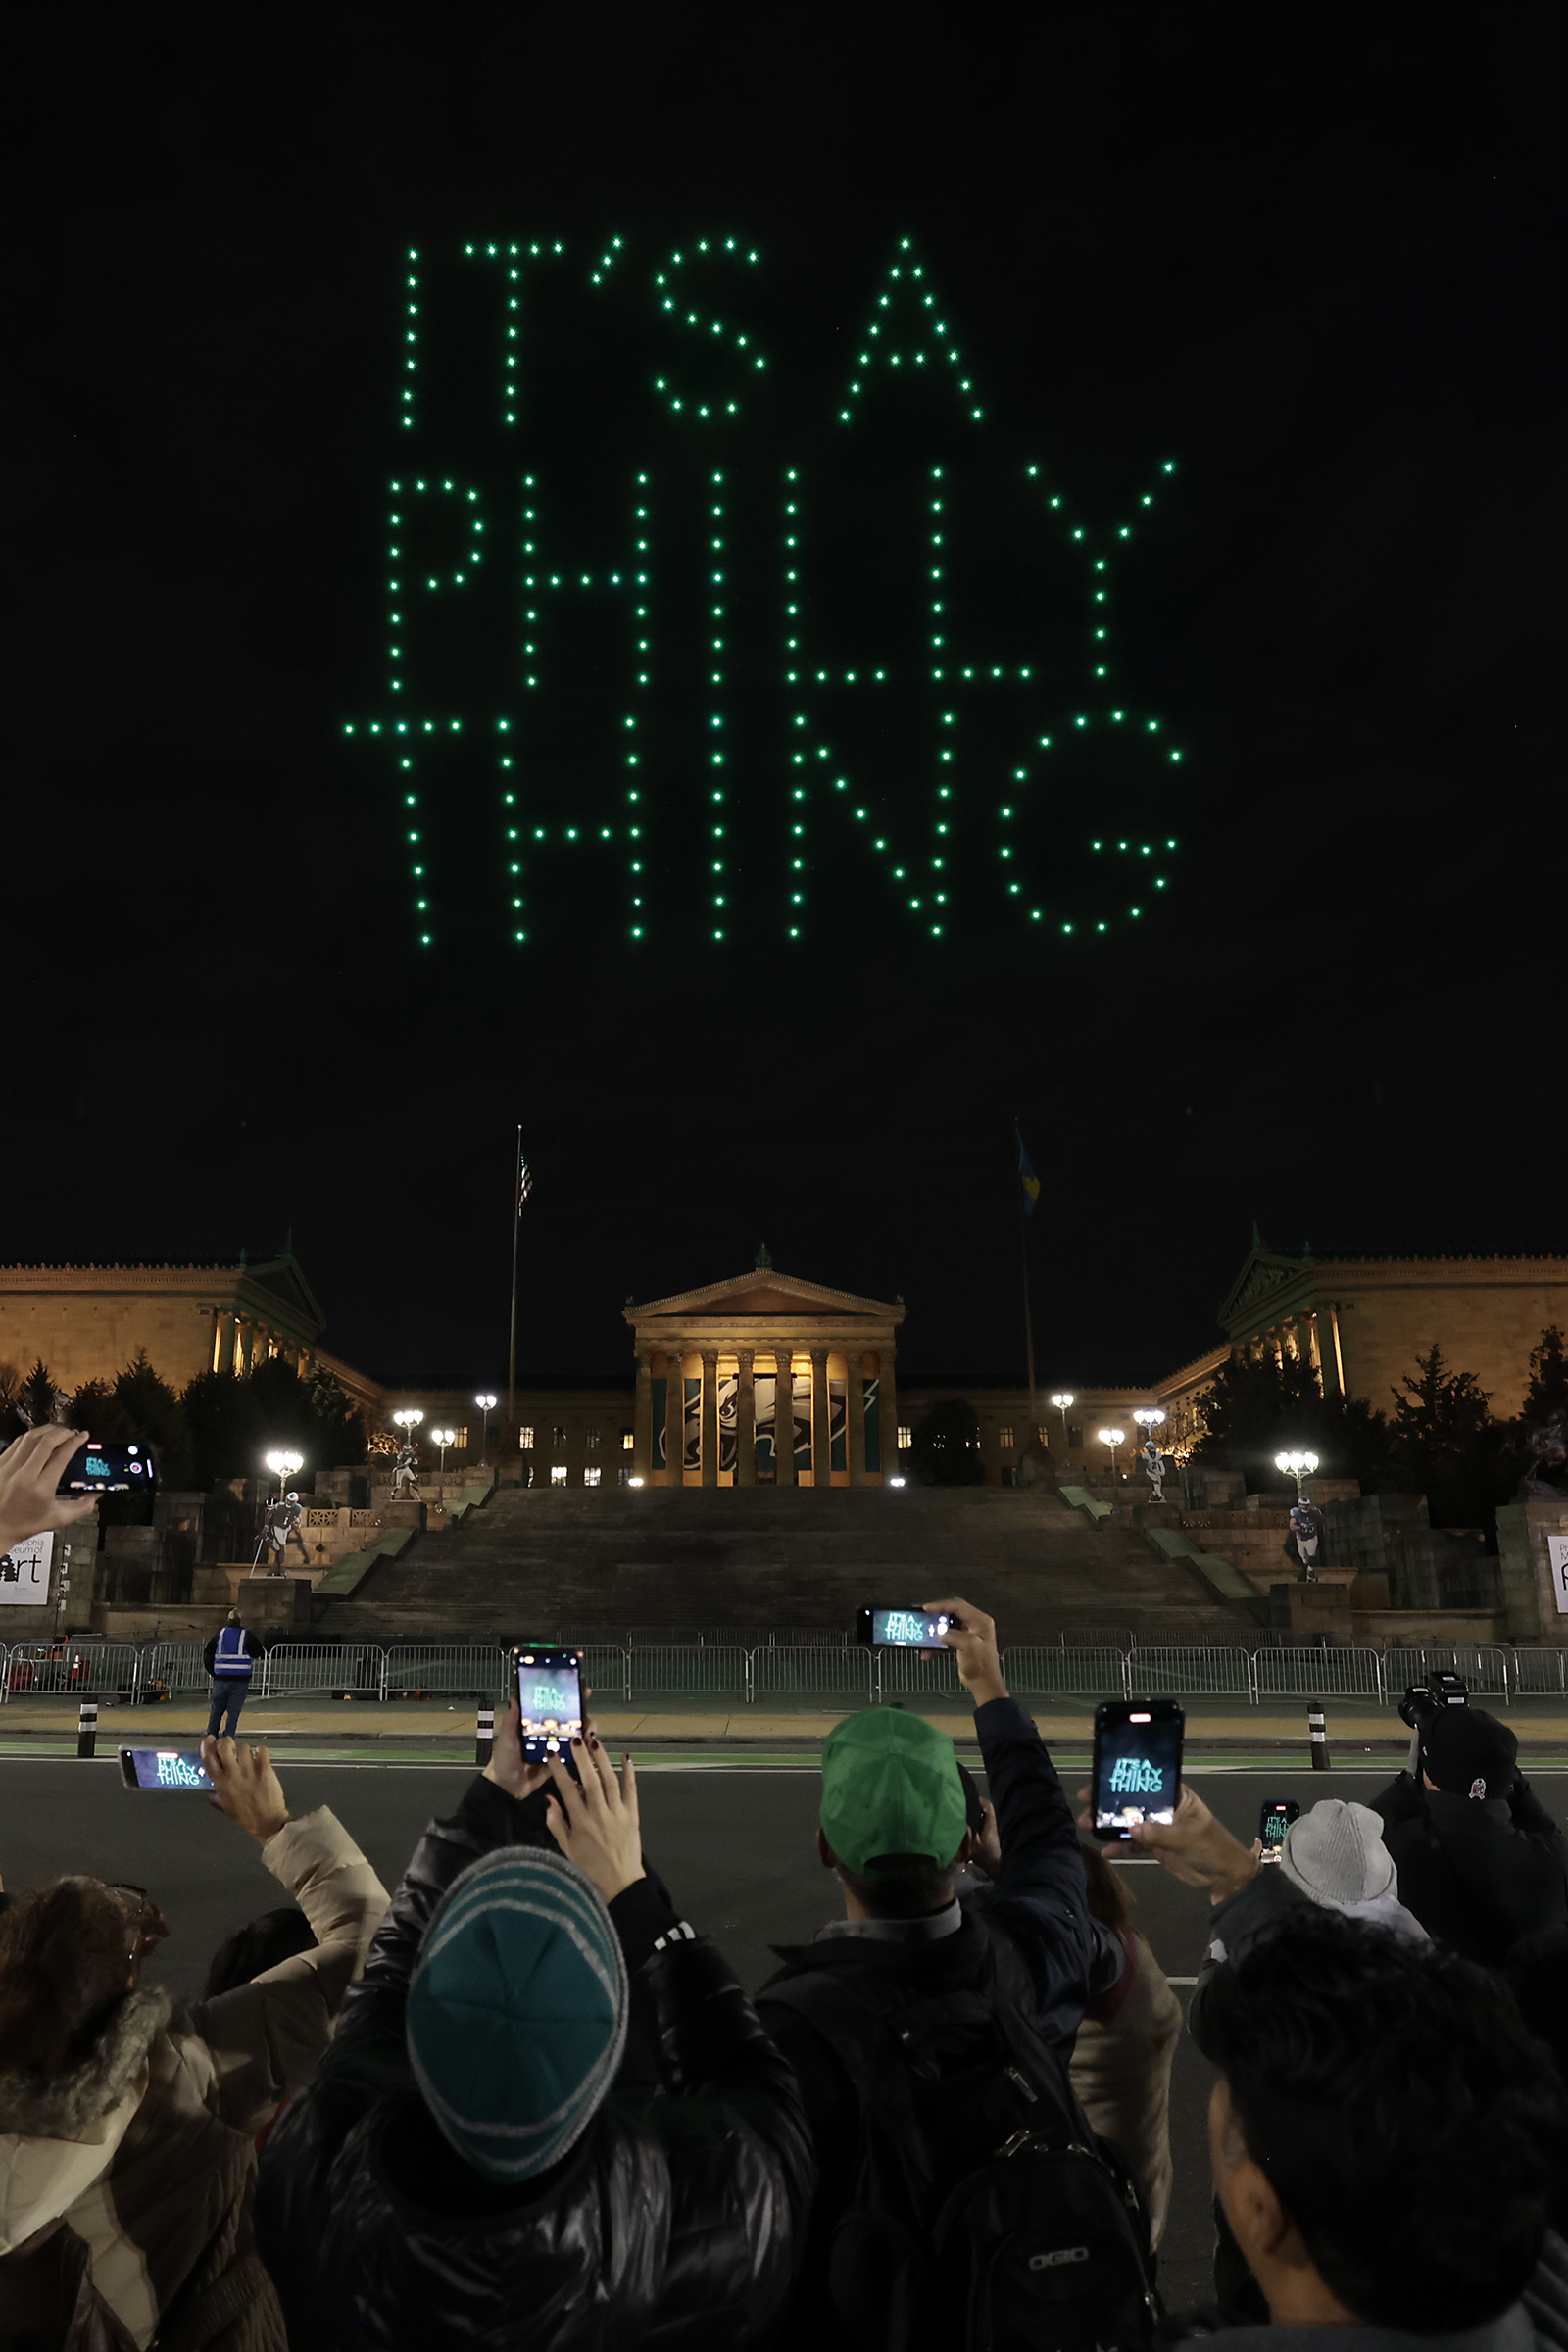 IT'S A PHILLY THING! LFG!! : r/eagles